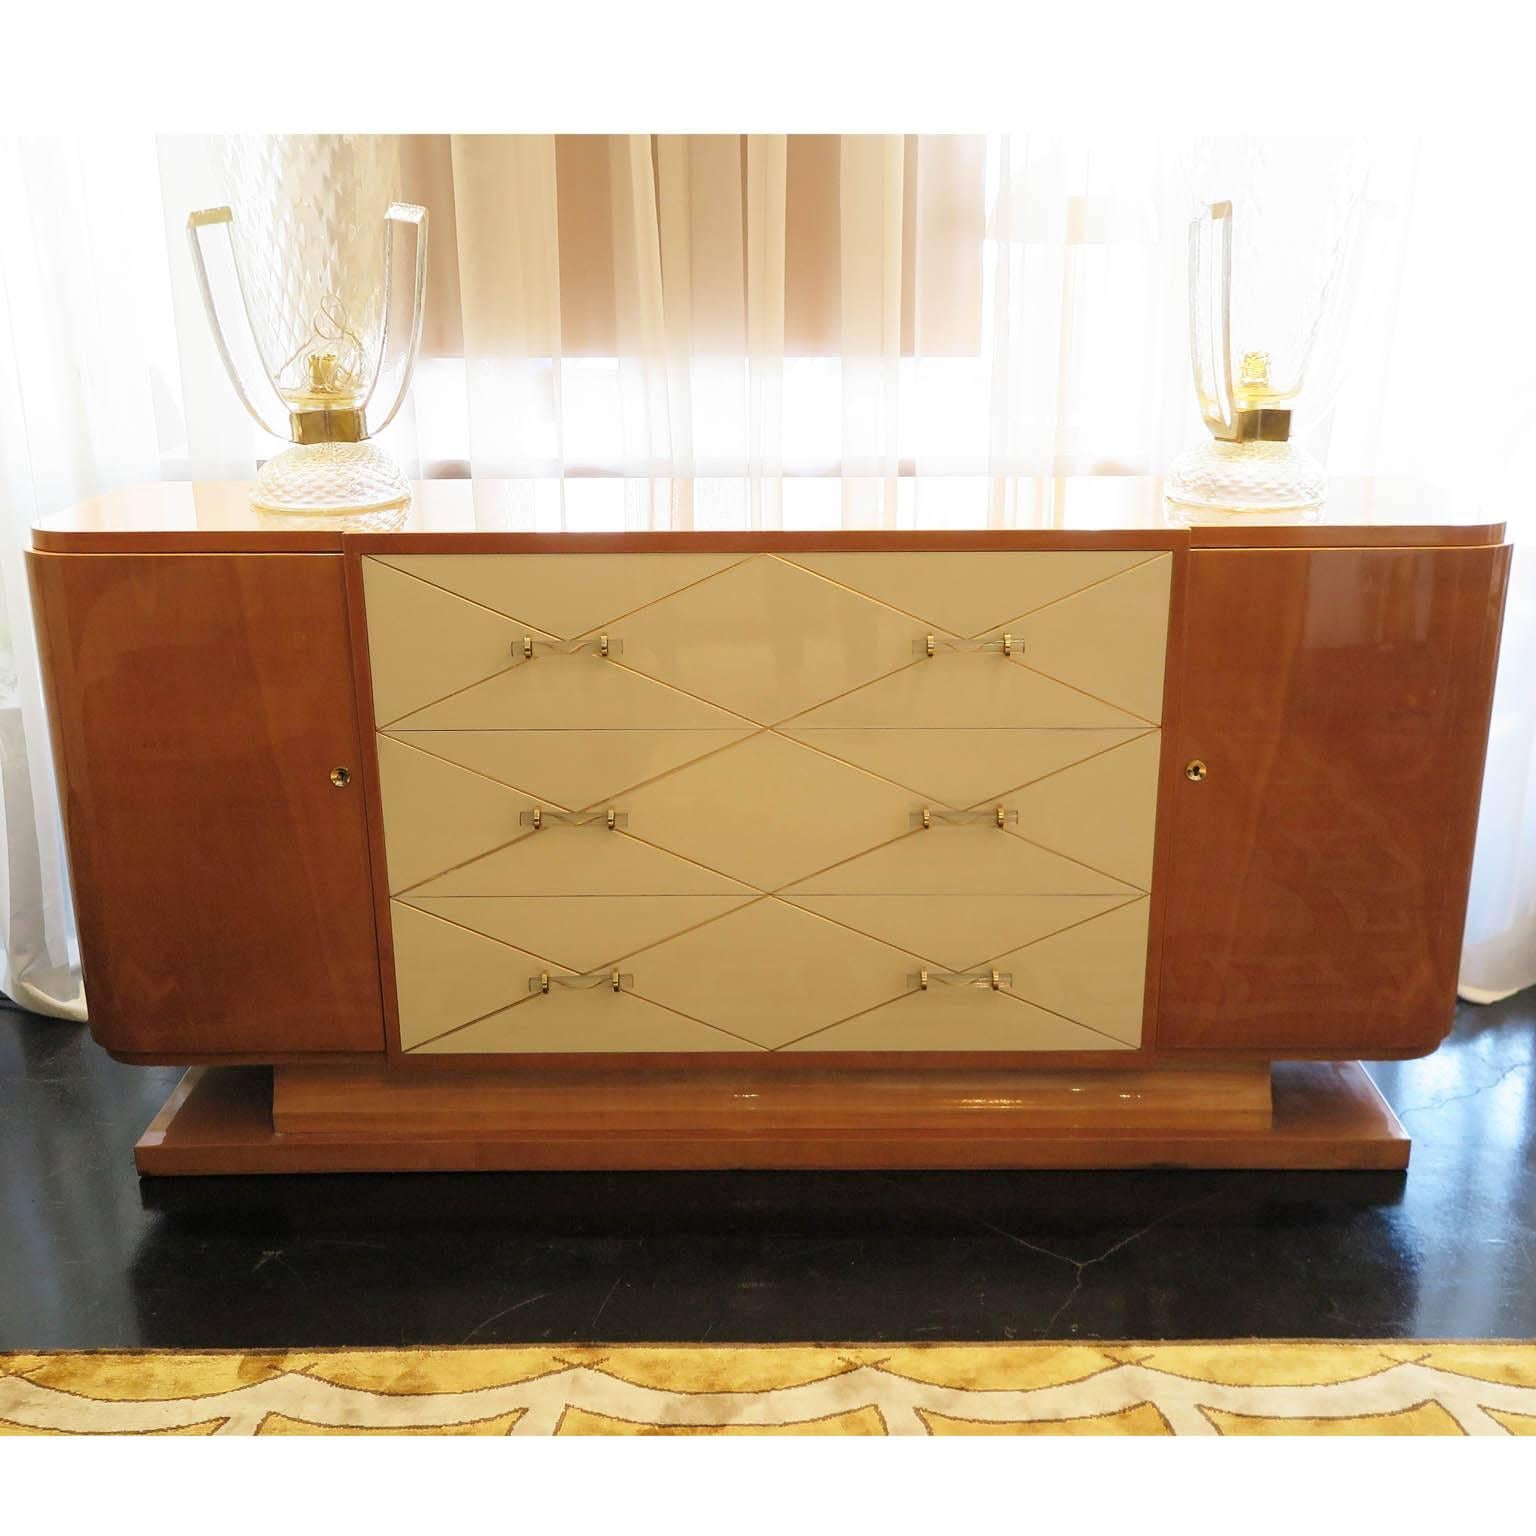 Glamorous warm-tone maple veneer sideboard with ivory lacquered drawers and original Lucite and brass pulls. A gold leaf harlequin pattern decorates the front of the three drawers. The sideboard also features two locking cabinet doors that conceal